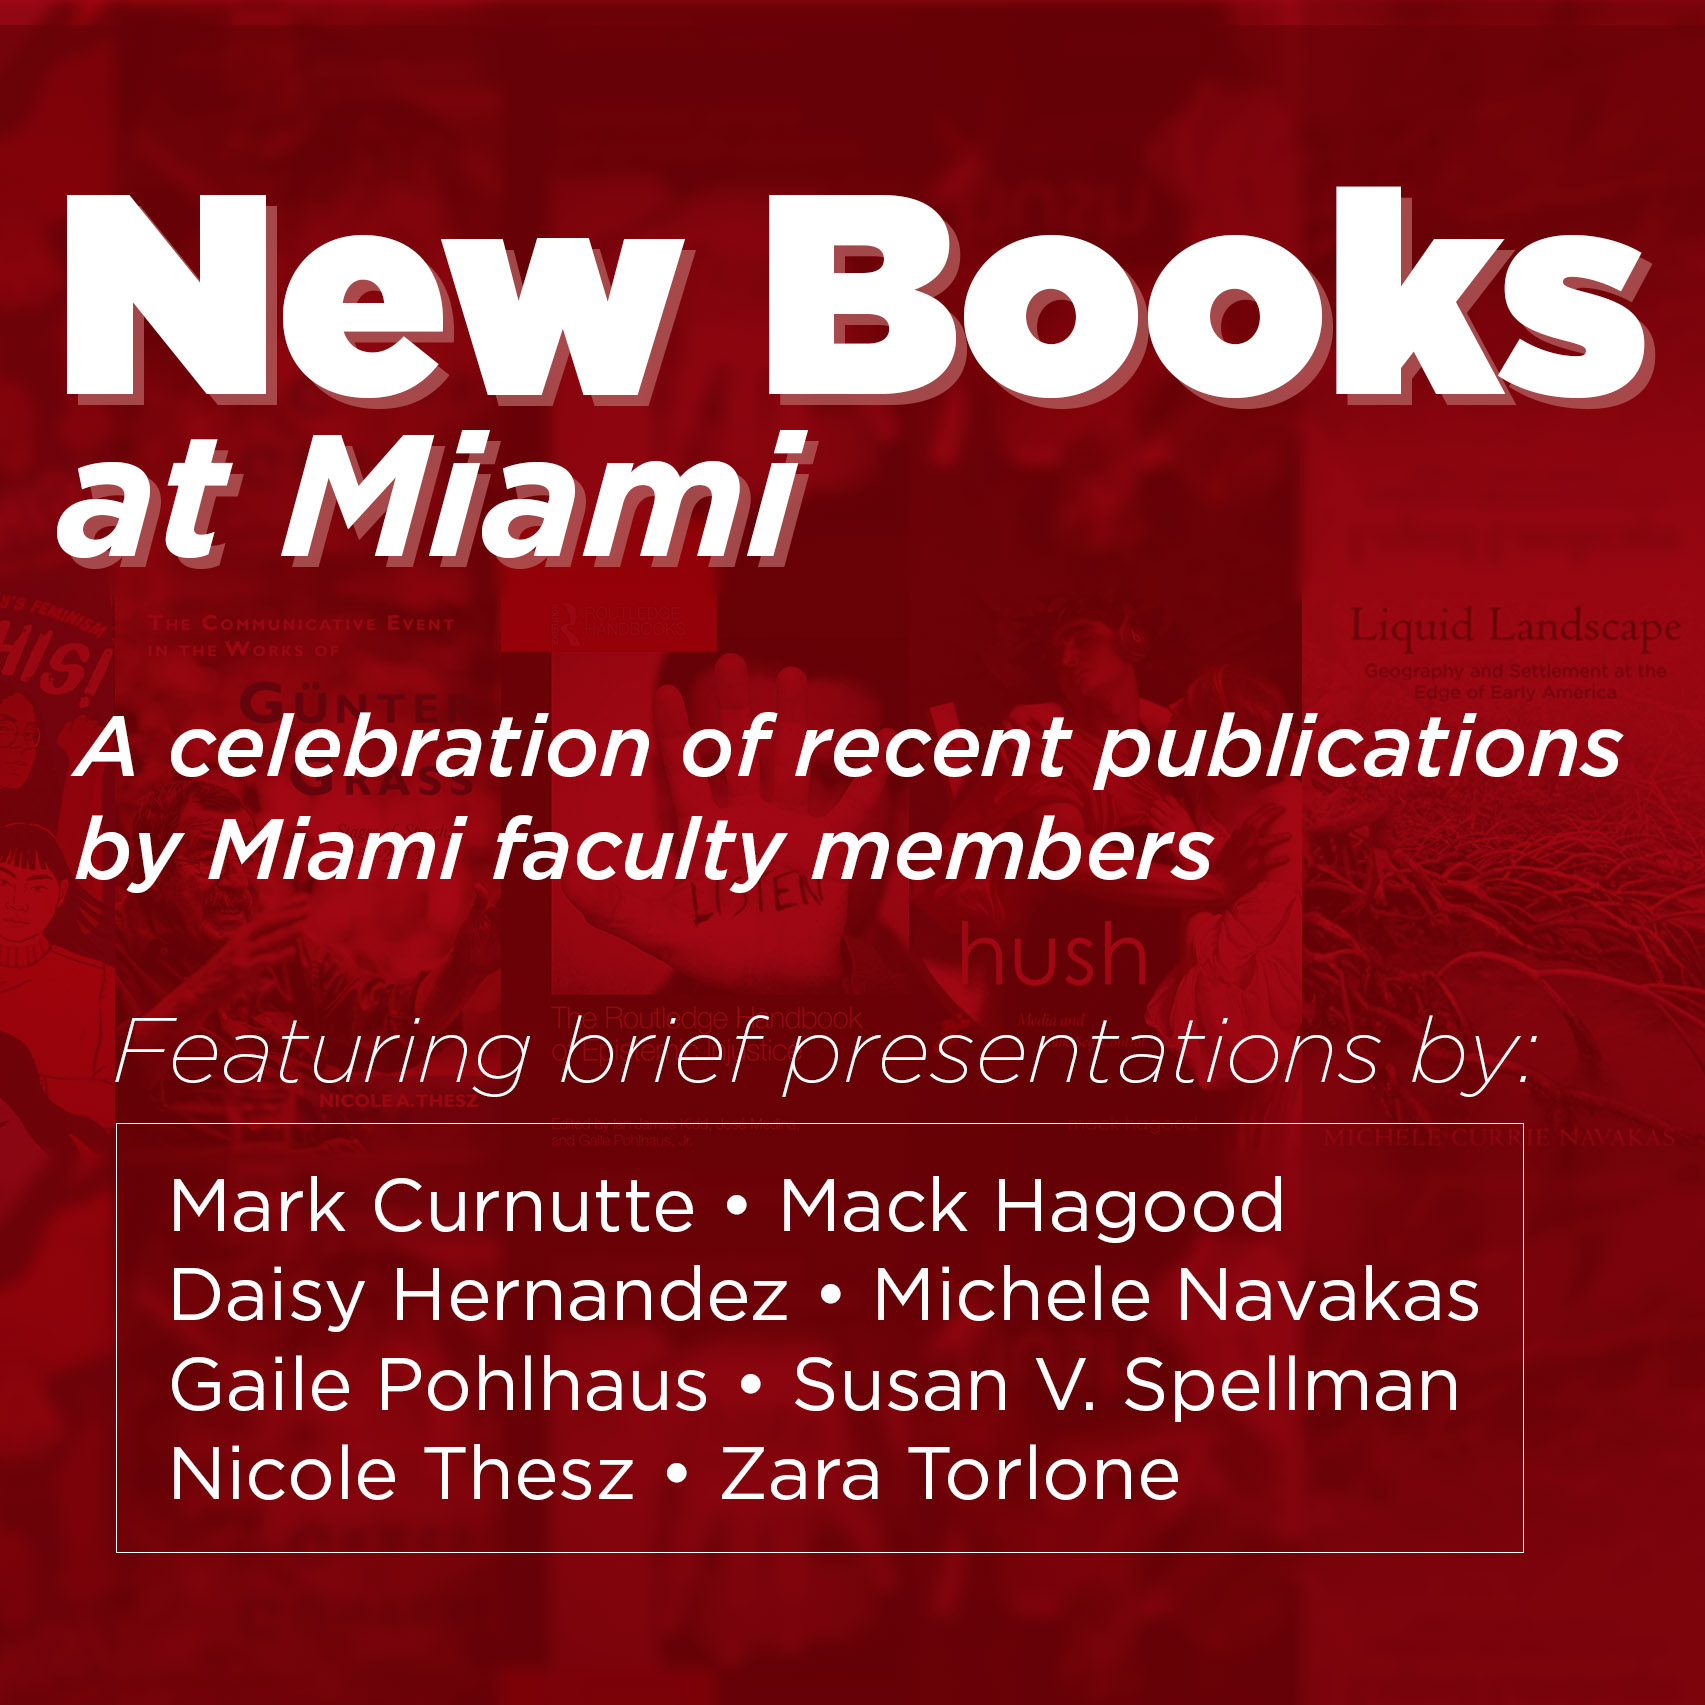 New Books at Miami, a celebration of recent publications by Miami faculty